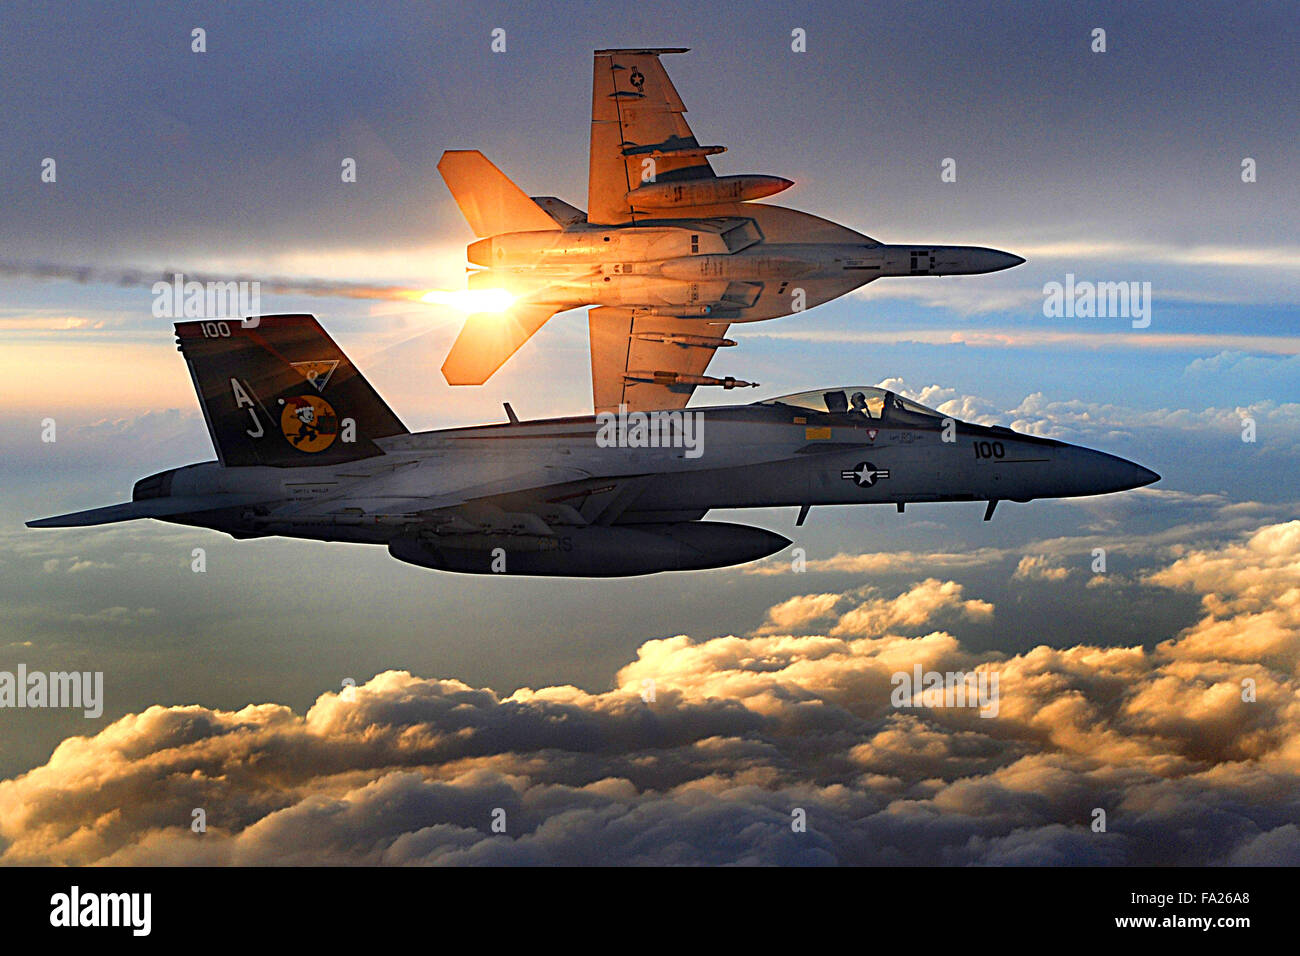 Two U.S. Navy F/A-18 Super Hornets from Strike Fighter Squadron 31 fly a combat patrol over Afghanistan on Dec. 15, 2008.  DoD photo by Staff Sgt. Aaron Allmon, U.S. Air Force.  (Released) Stock Photo